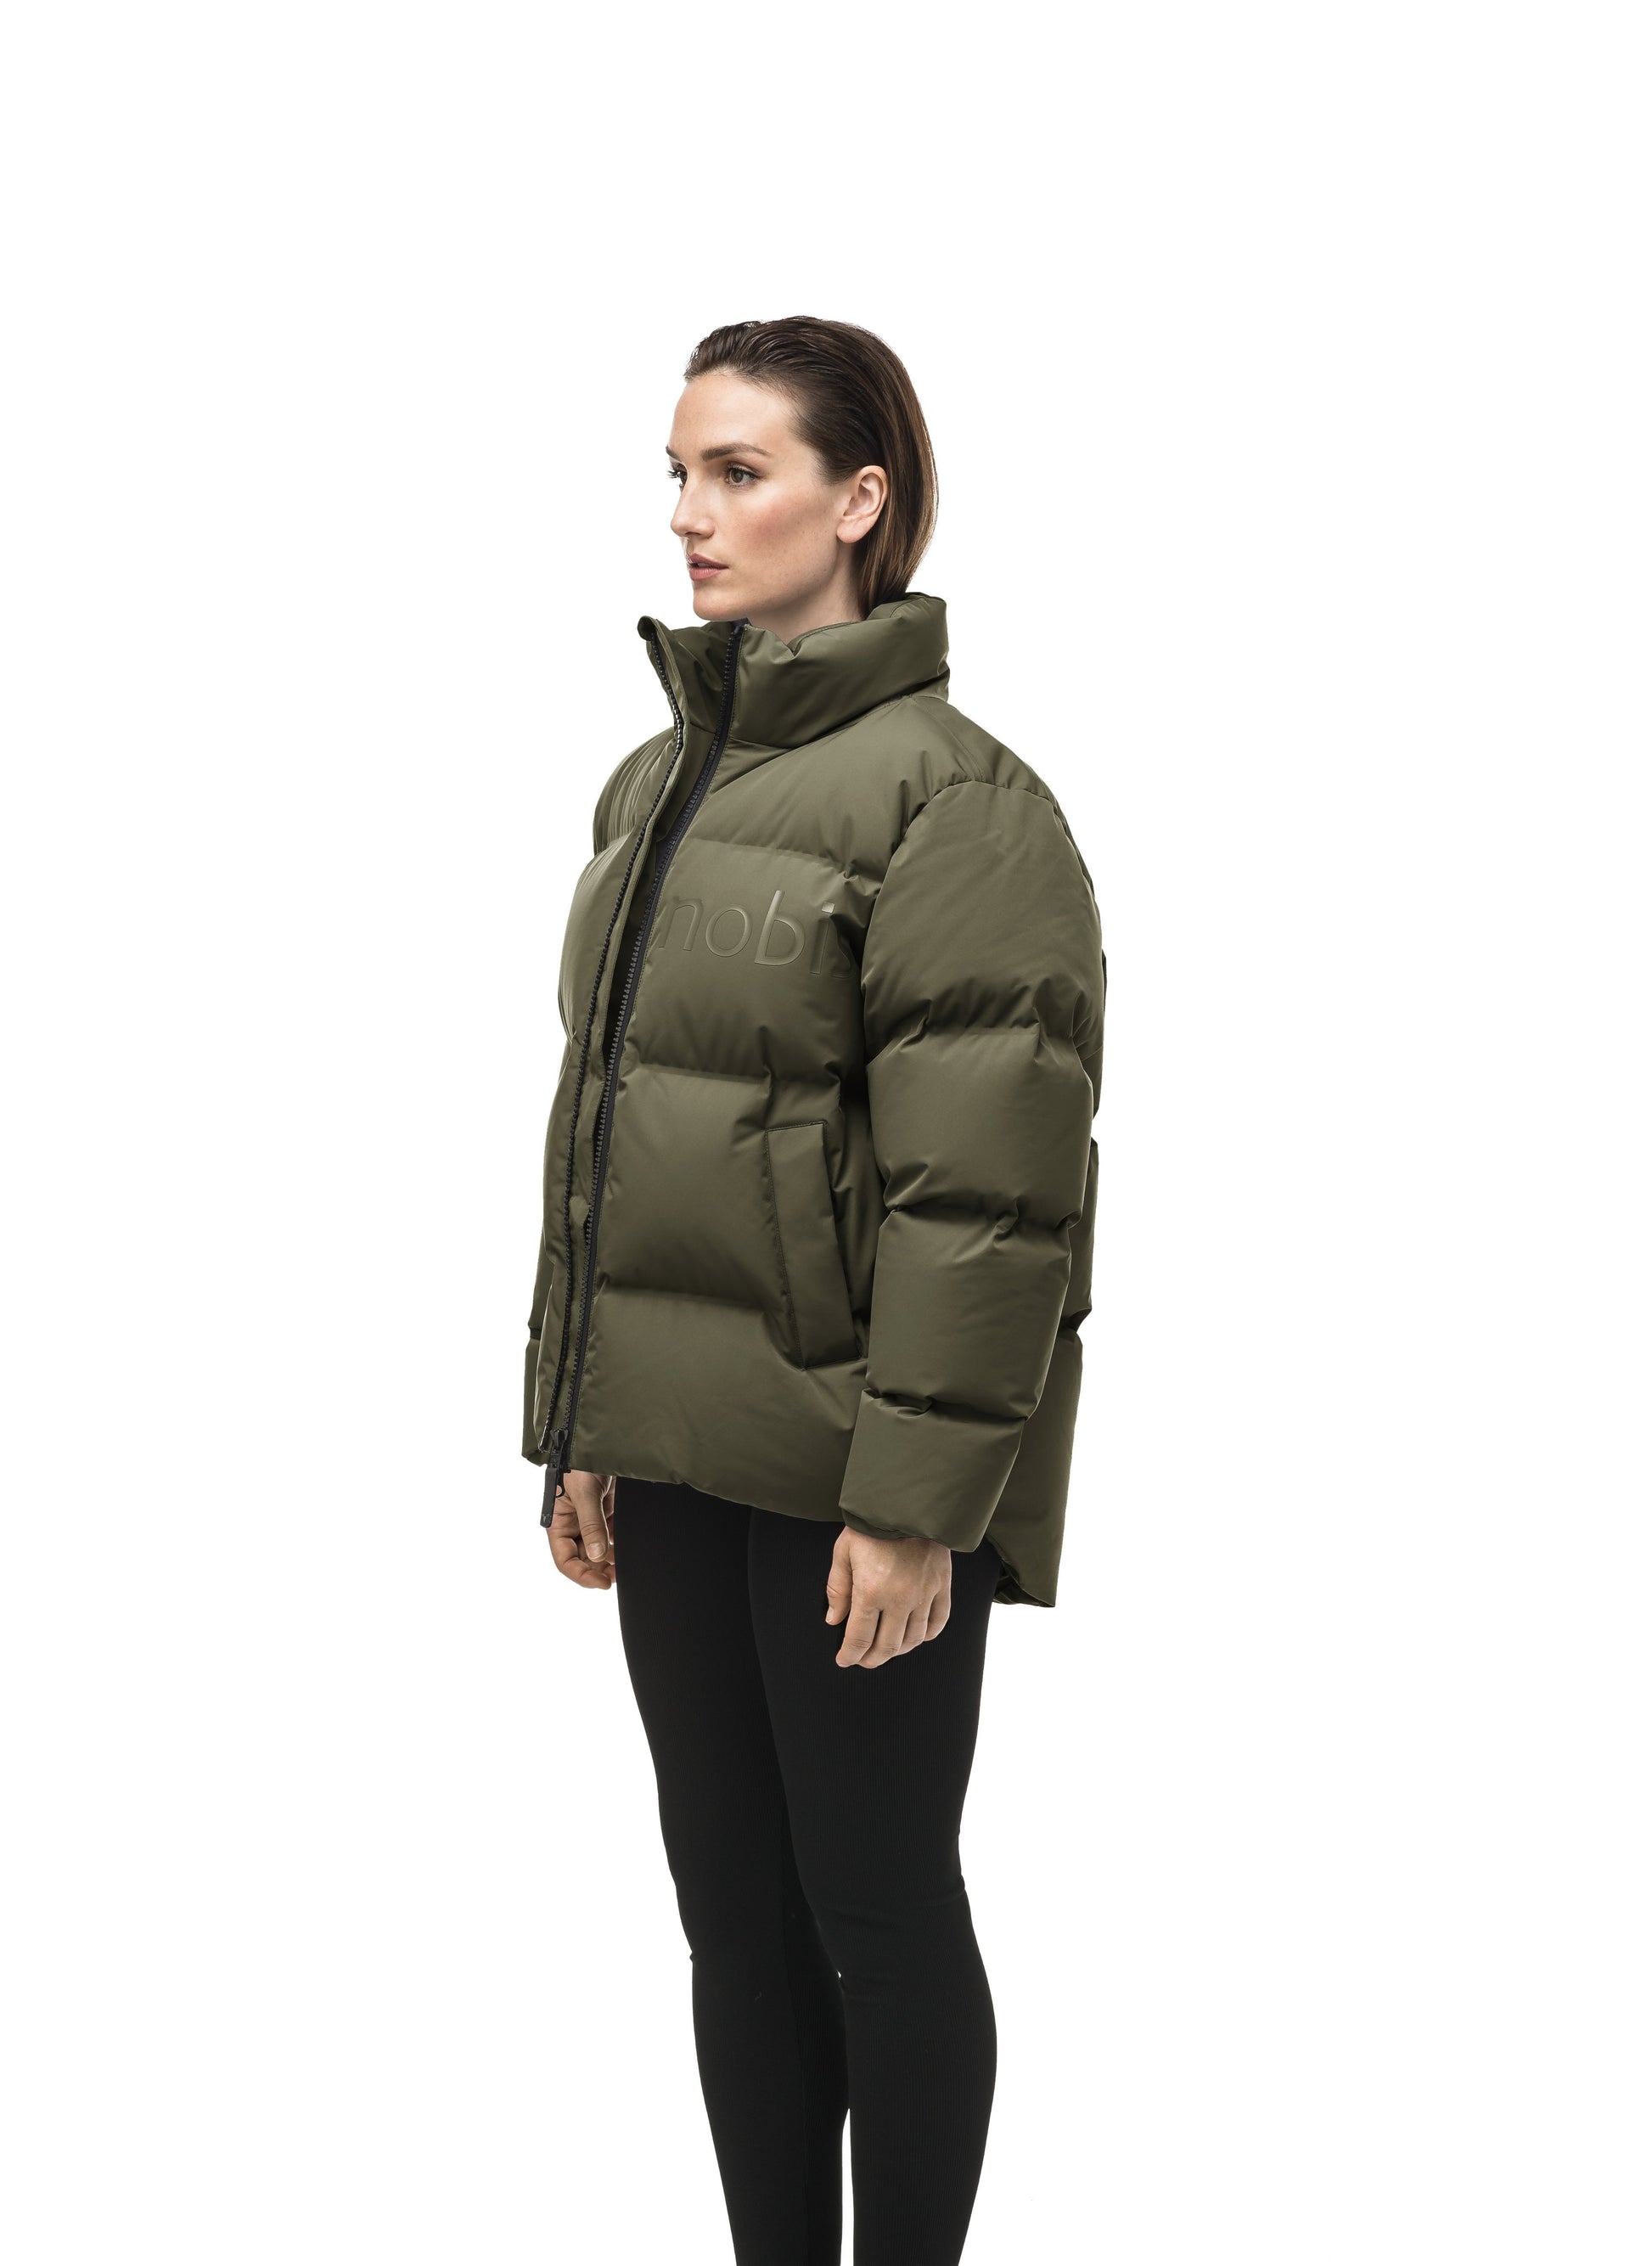 Women's puffer jacket with a minimalist modern design; featuring graphic details like oversized tonal branding, an exposed zipper, and seamless puffer channels to lock in the Premium Canadian Origin White Duck Down in Fatigue